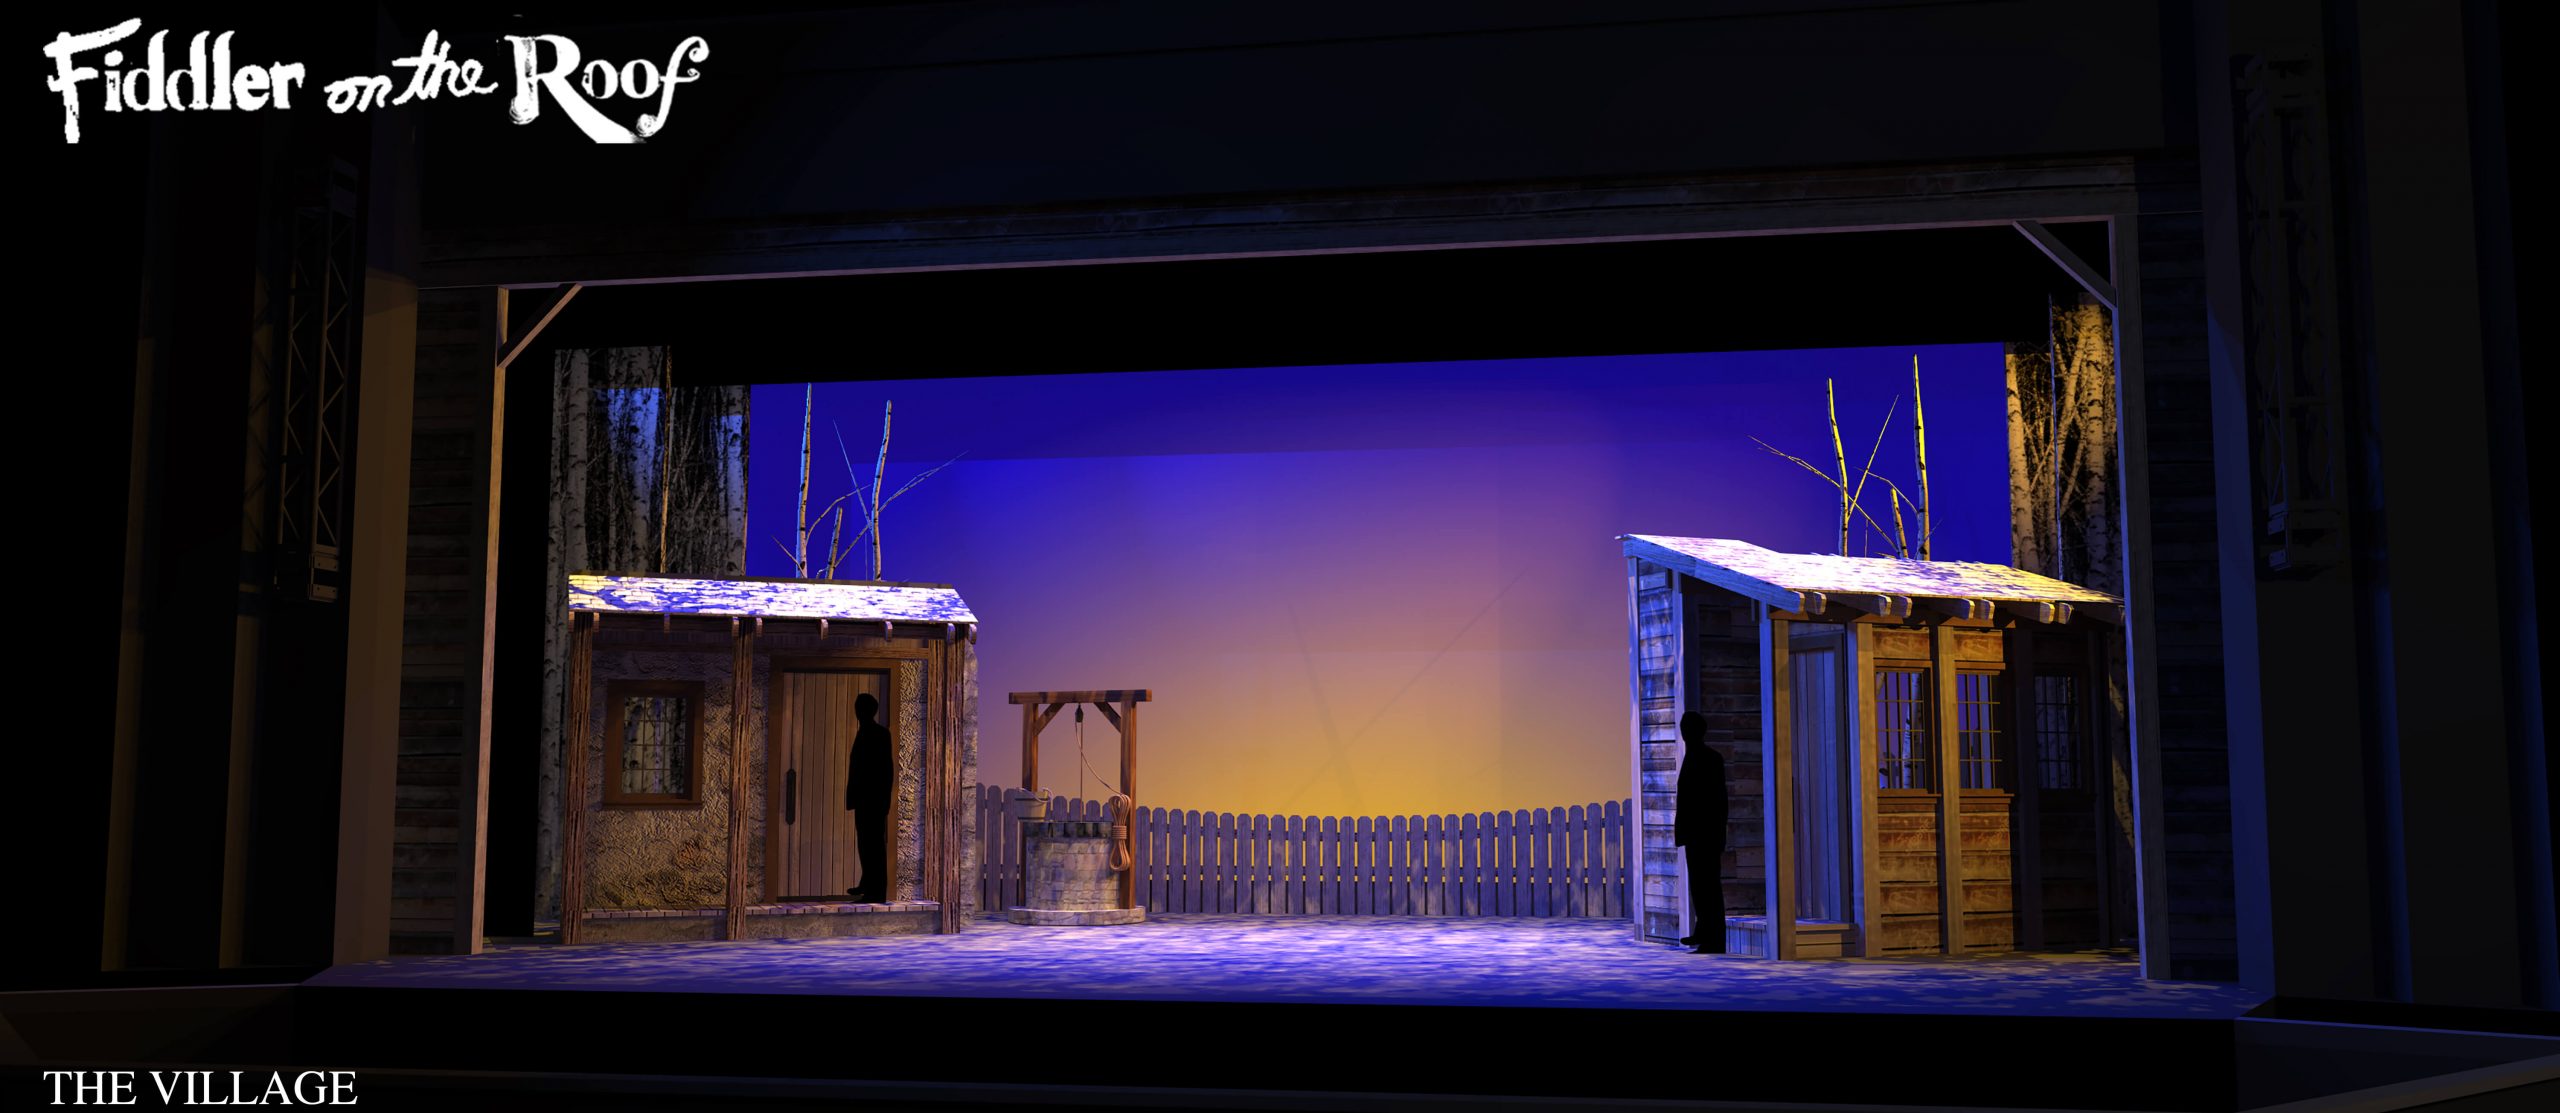 Fiddler on the Roof Musical - village antevka - scenery rental - Front Row Theatrical